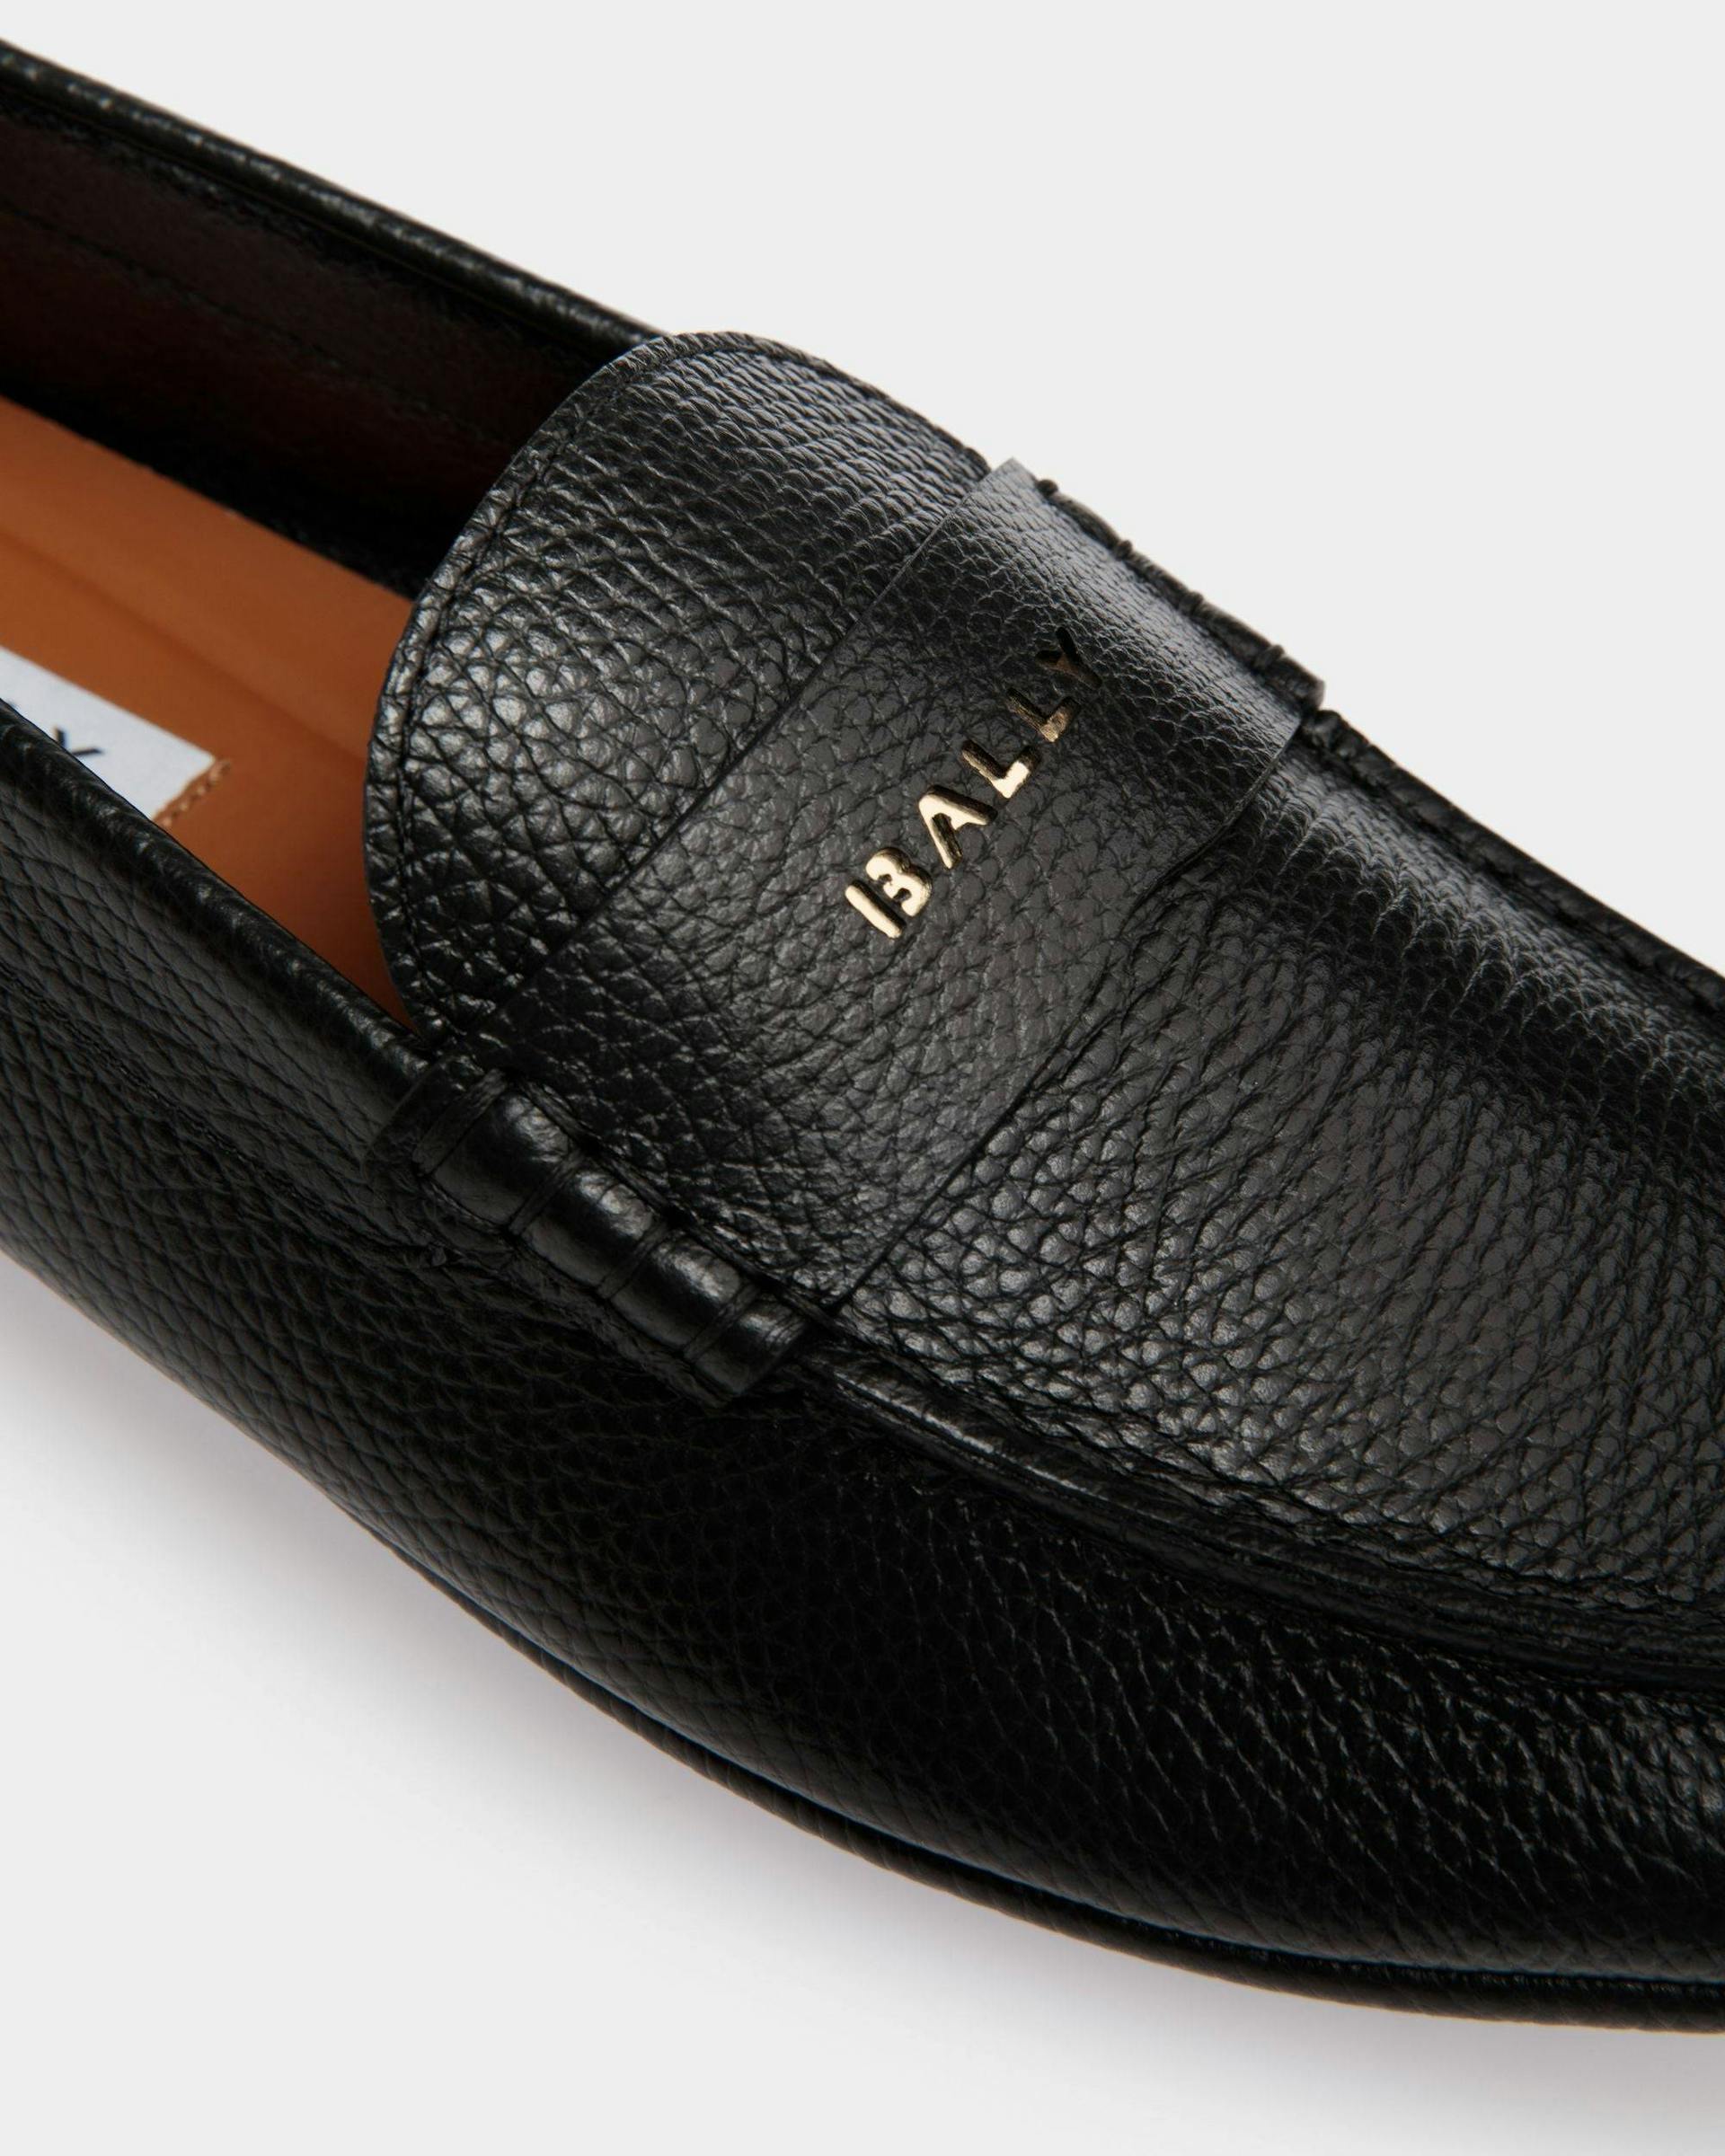 Men's Kerbs Driver in Black Grained Leather | Bally | Still Life Detail